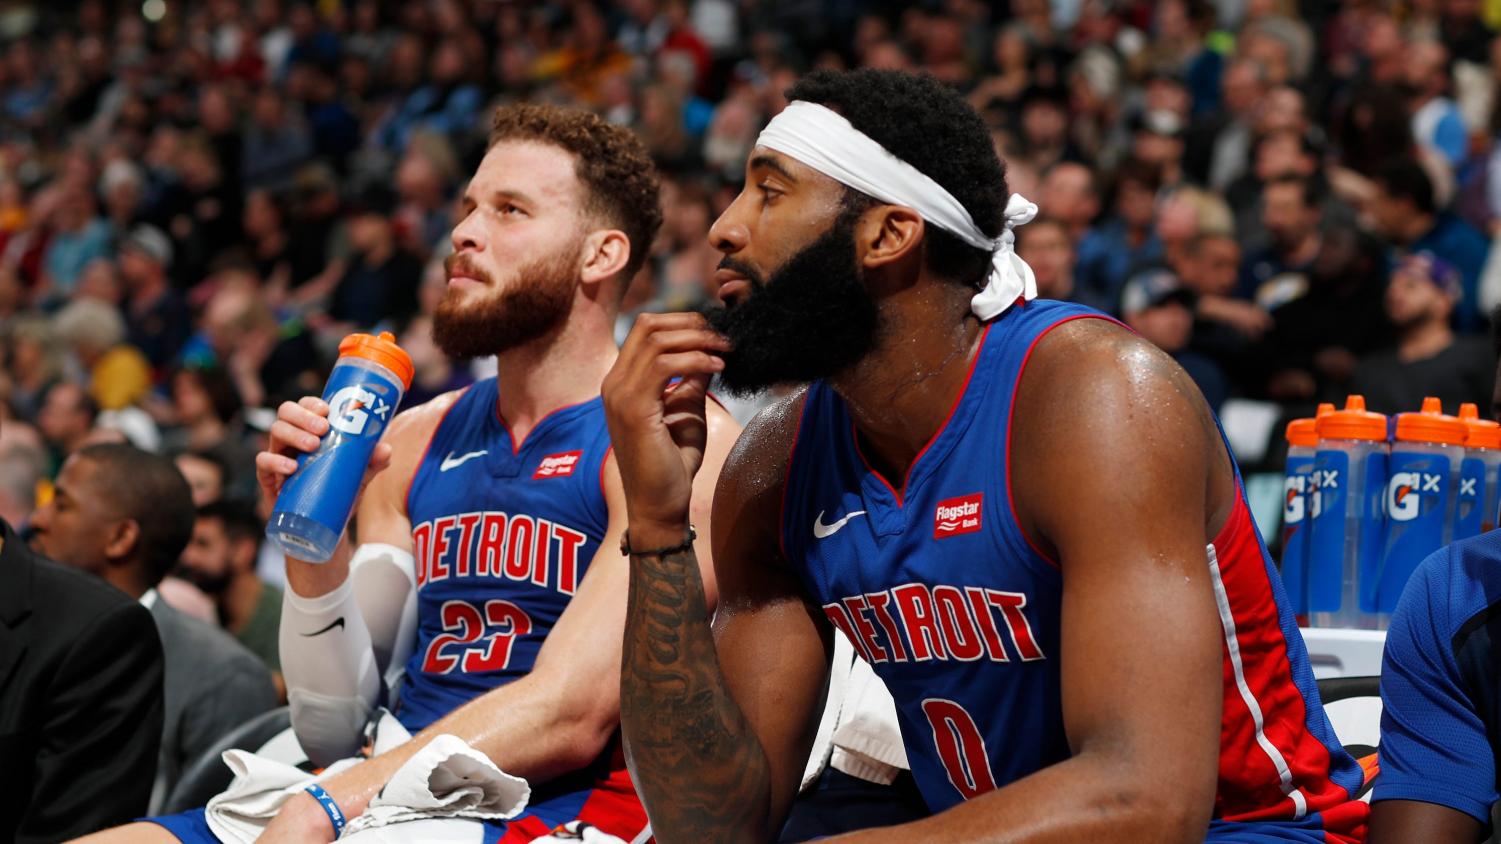 Detroit Pistons vs. Brooklyn Nets game preview: Kyrie irving faces Andre  Drummond, Derrick Rose in Detroit - Detroit Bad Boys